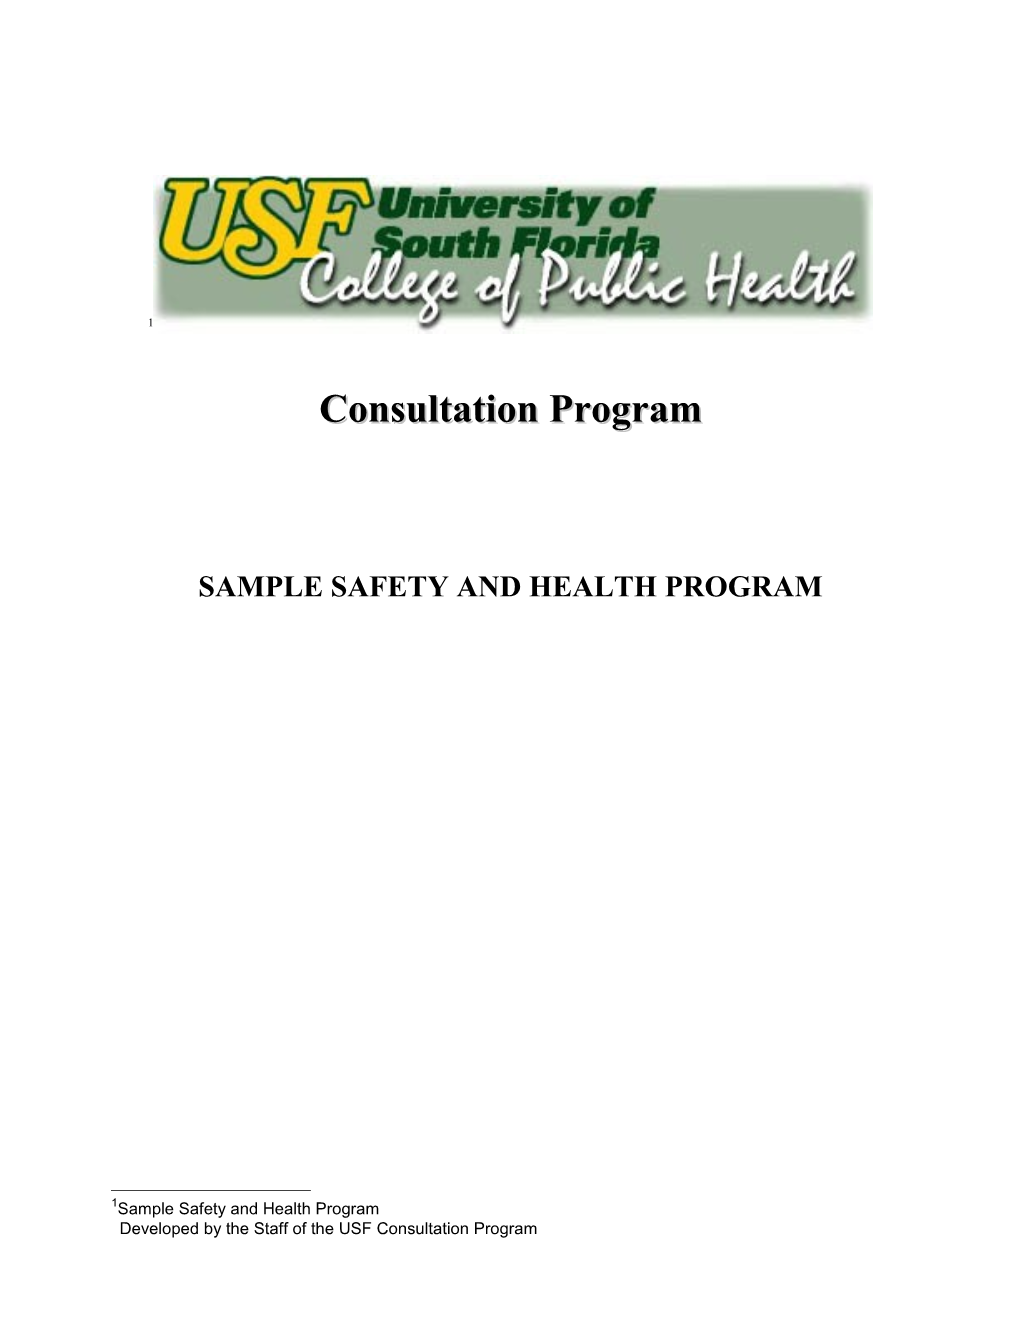 Sample Safety and Health Program